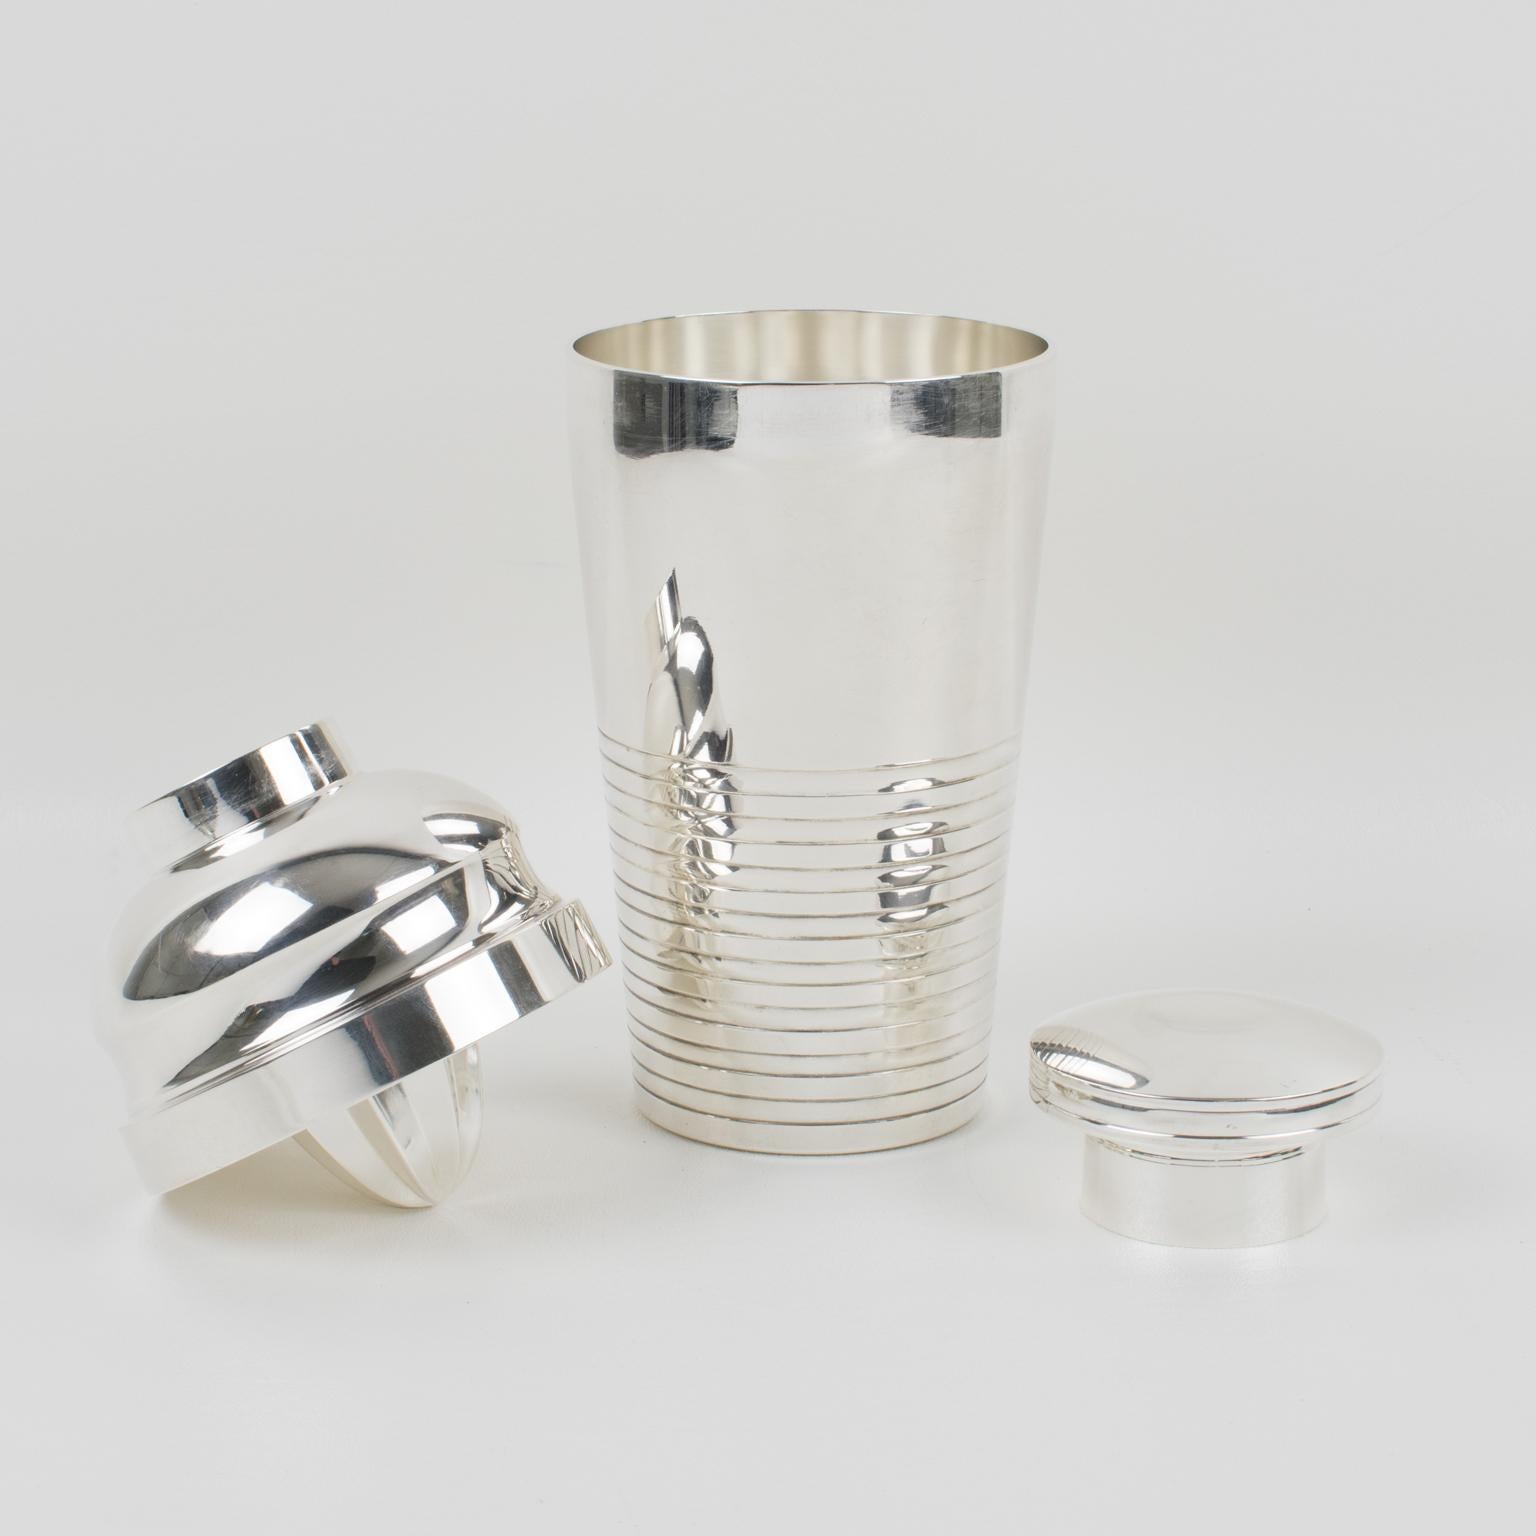 Stylish French Art Deco silver plate cylindrical cocktail or Martini shaker by silversmith Saint Medard, Paris. Three sectioned designed cocktail shaker with removable cap and strainer and lemon squeezer integrated underside of the strainer. Lovely